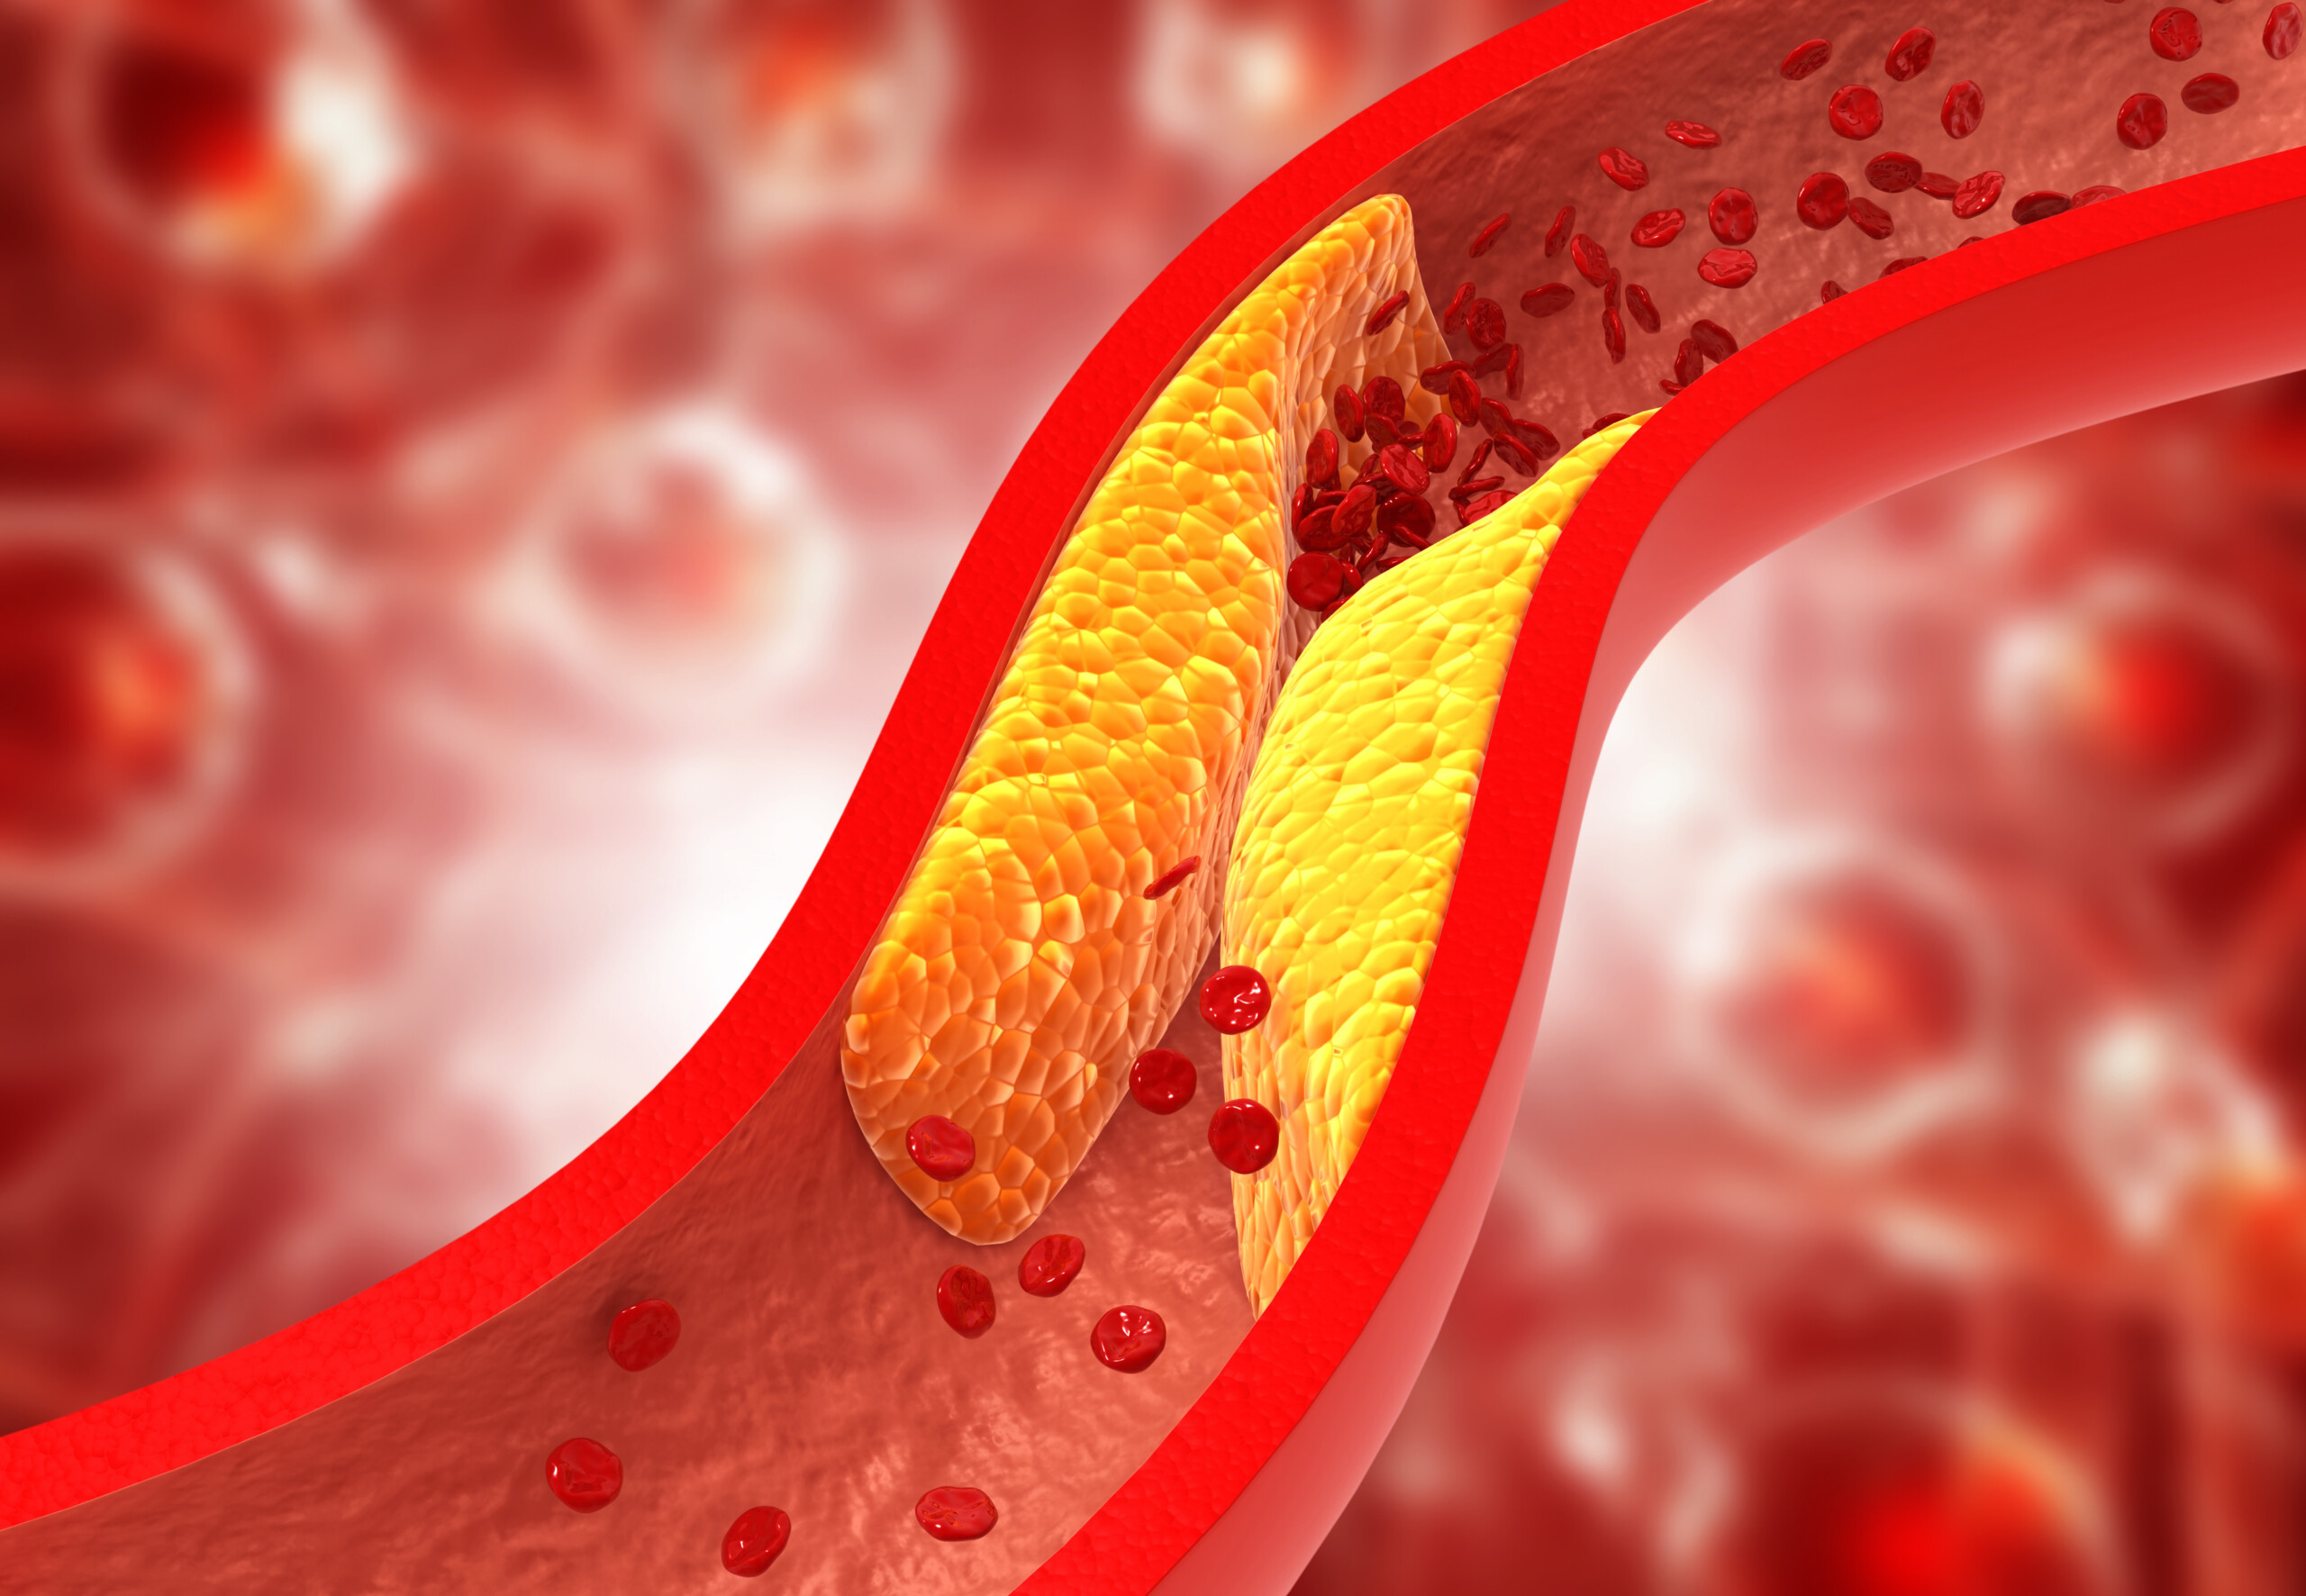 Can Two Supplements Reverse Plaque in Coronary Arteries?